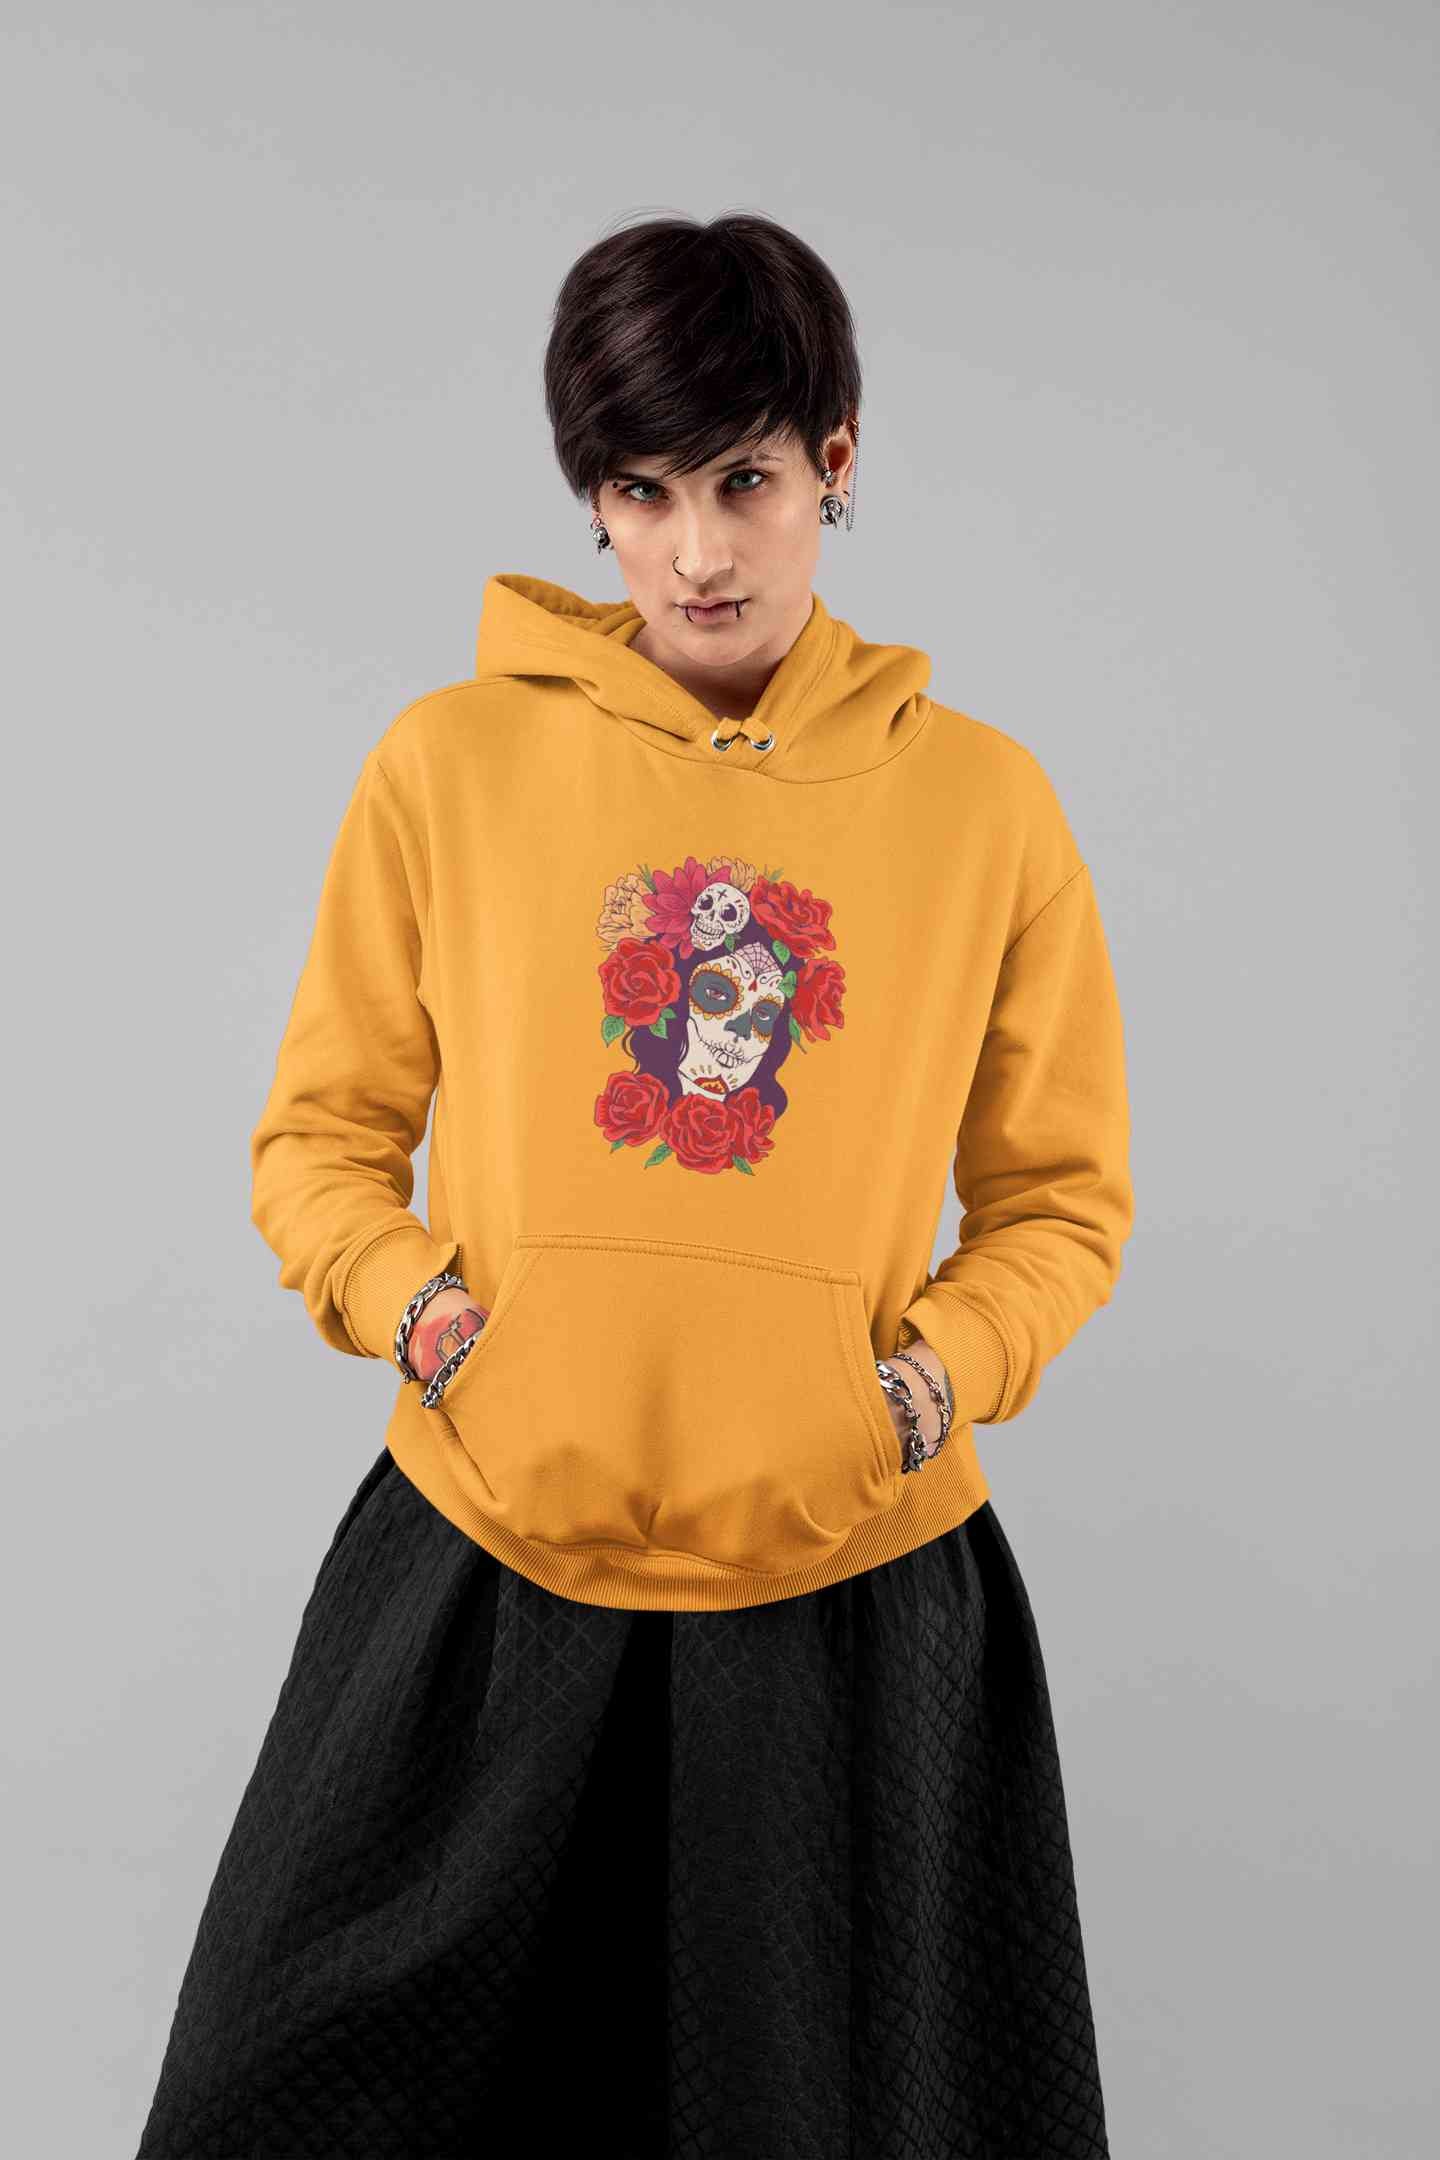 Day Of The Dead Floral Skull Illustration Hoodies for Women-FunkyTeesClub